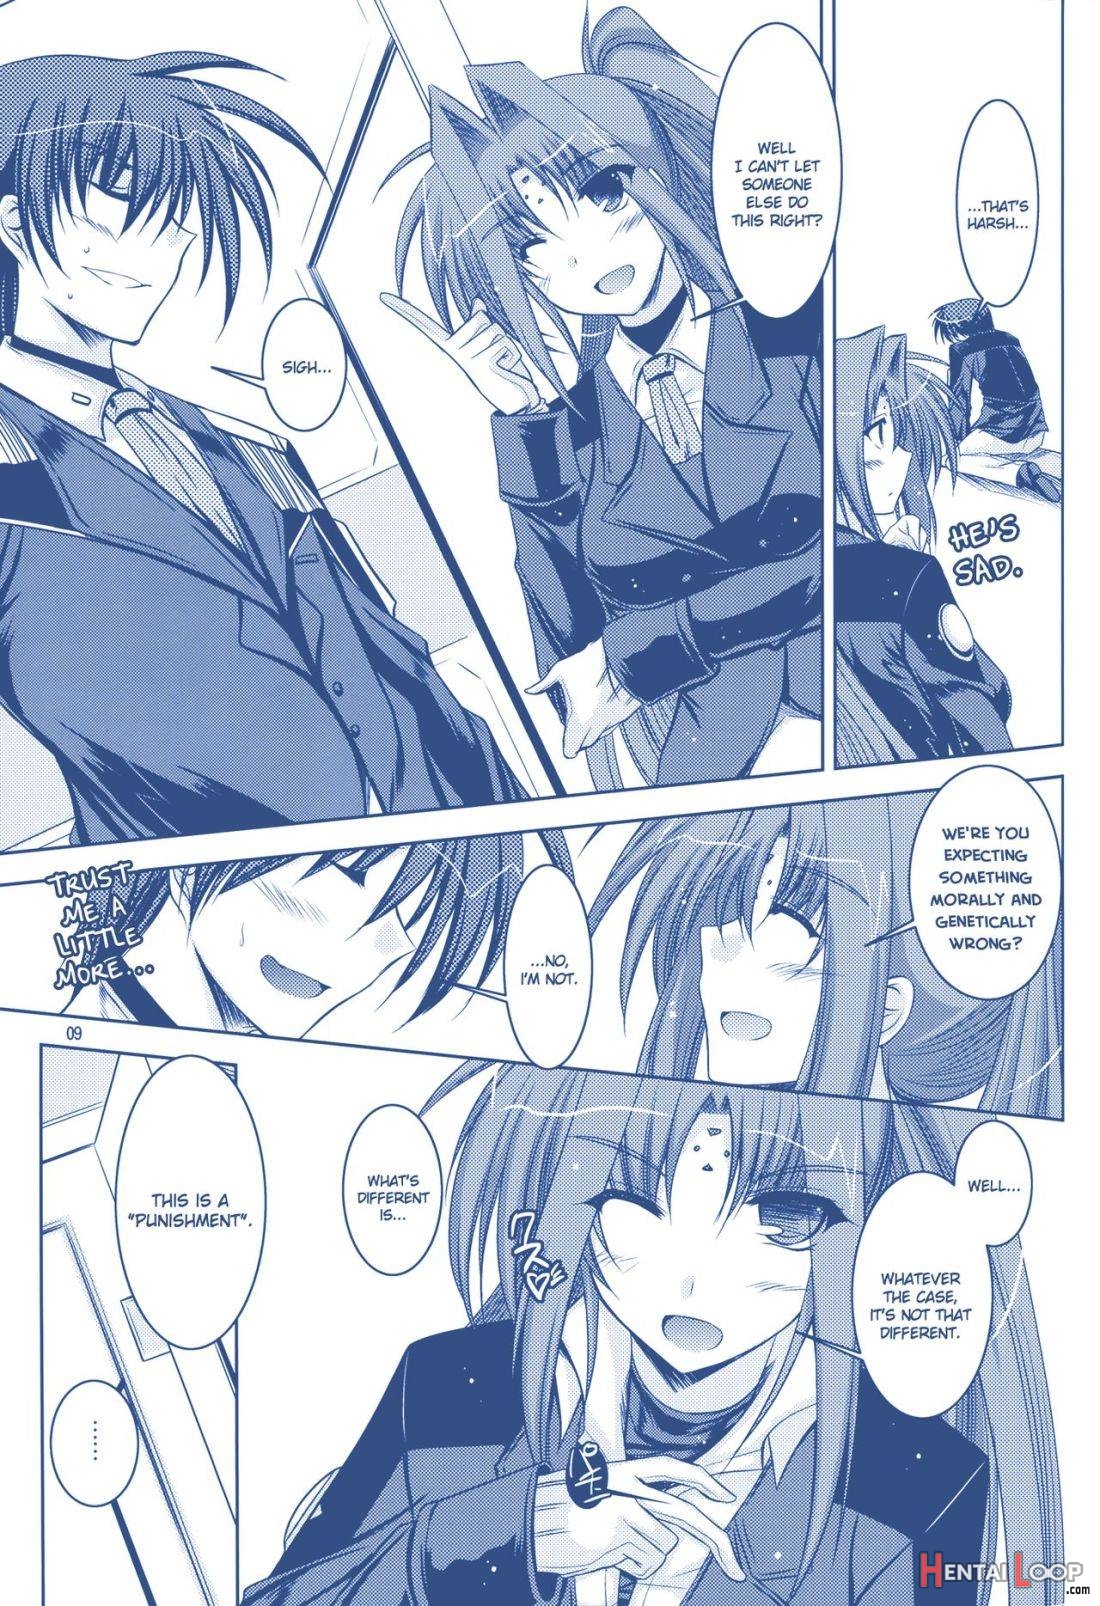 ANOTHER FRONTIER 02 Magical Girl Lyrical Lindy-san #03 page 8